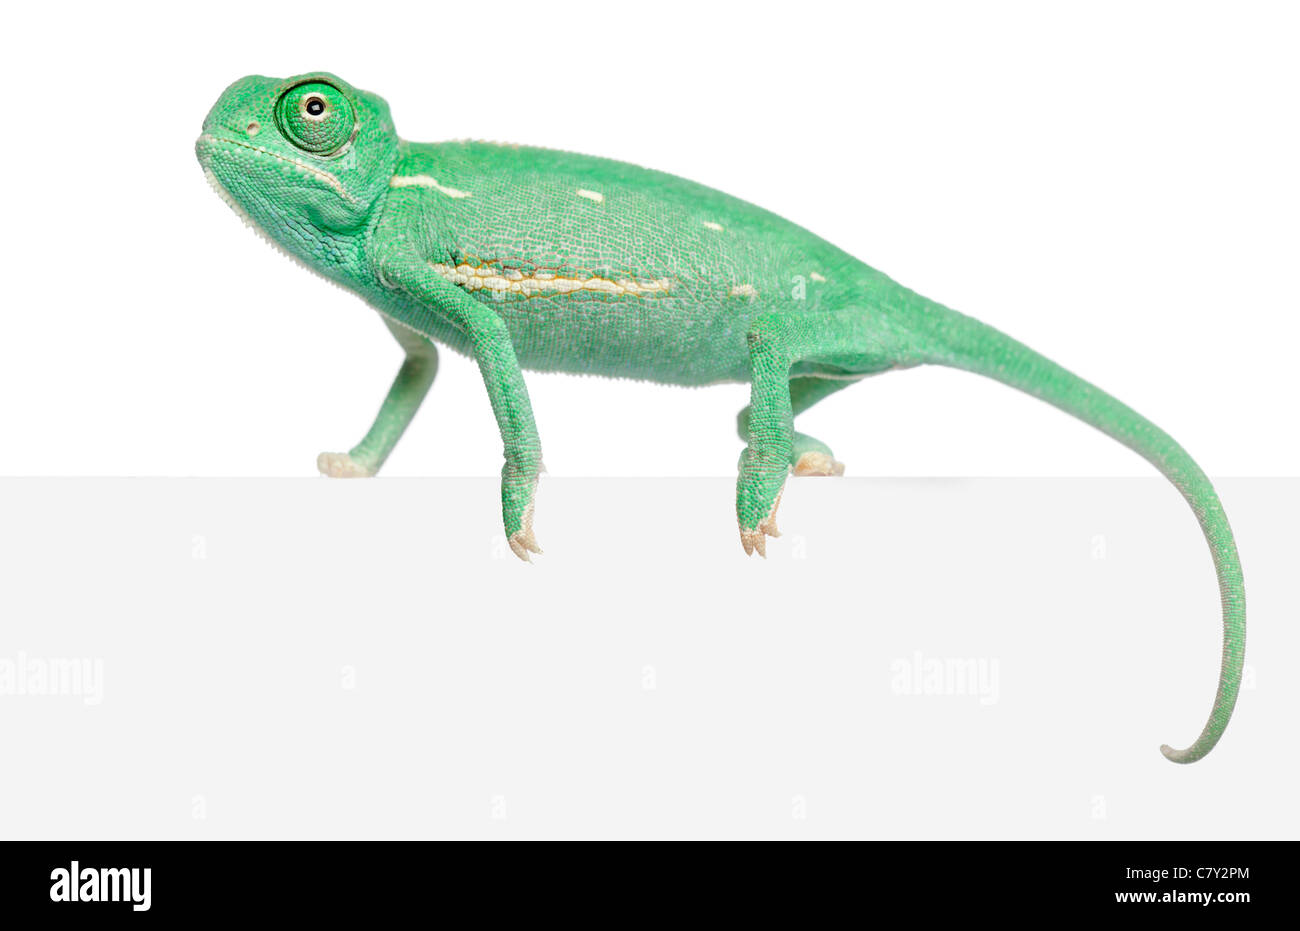 Young veiled chameleon, Chamaeleo calyptratus, in front of white background Stock Photo